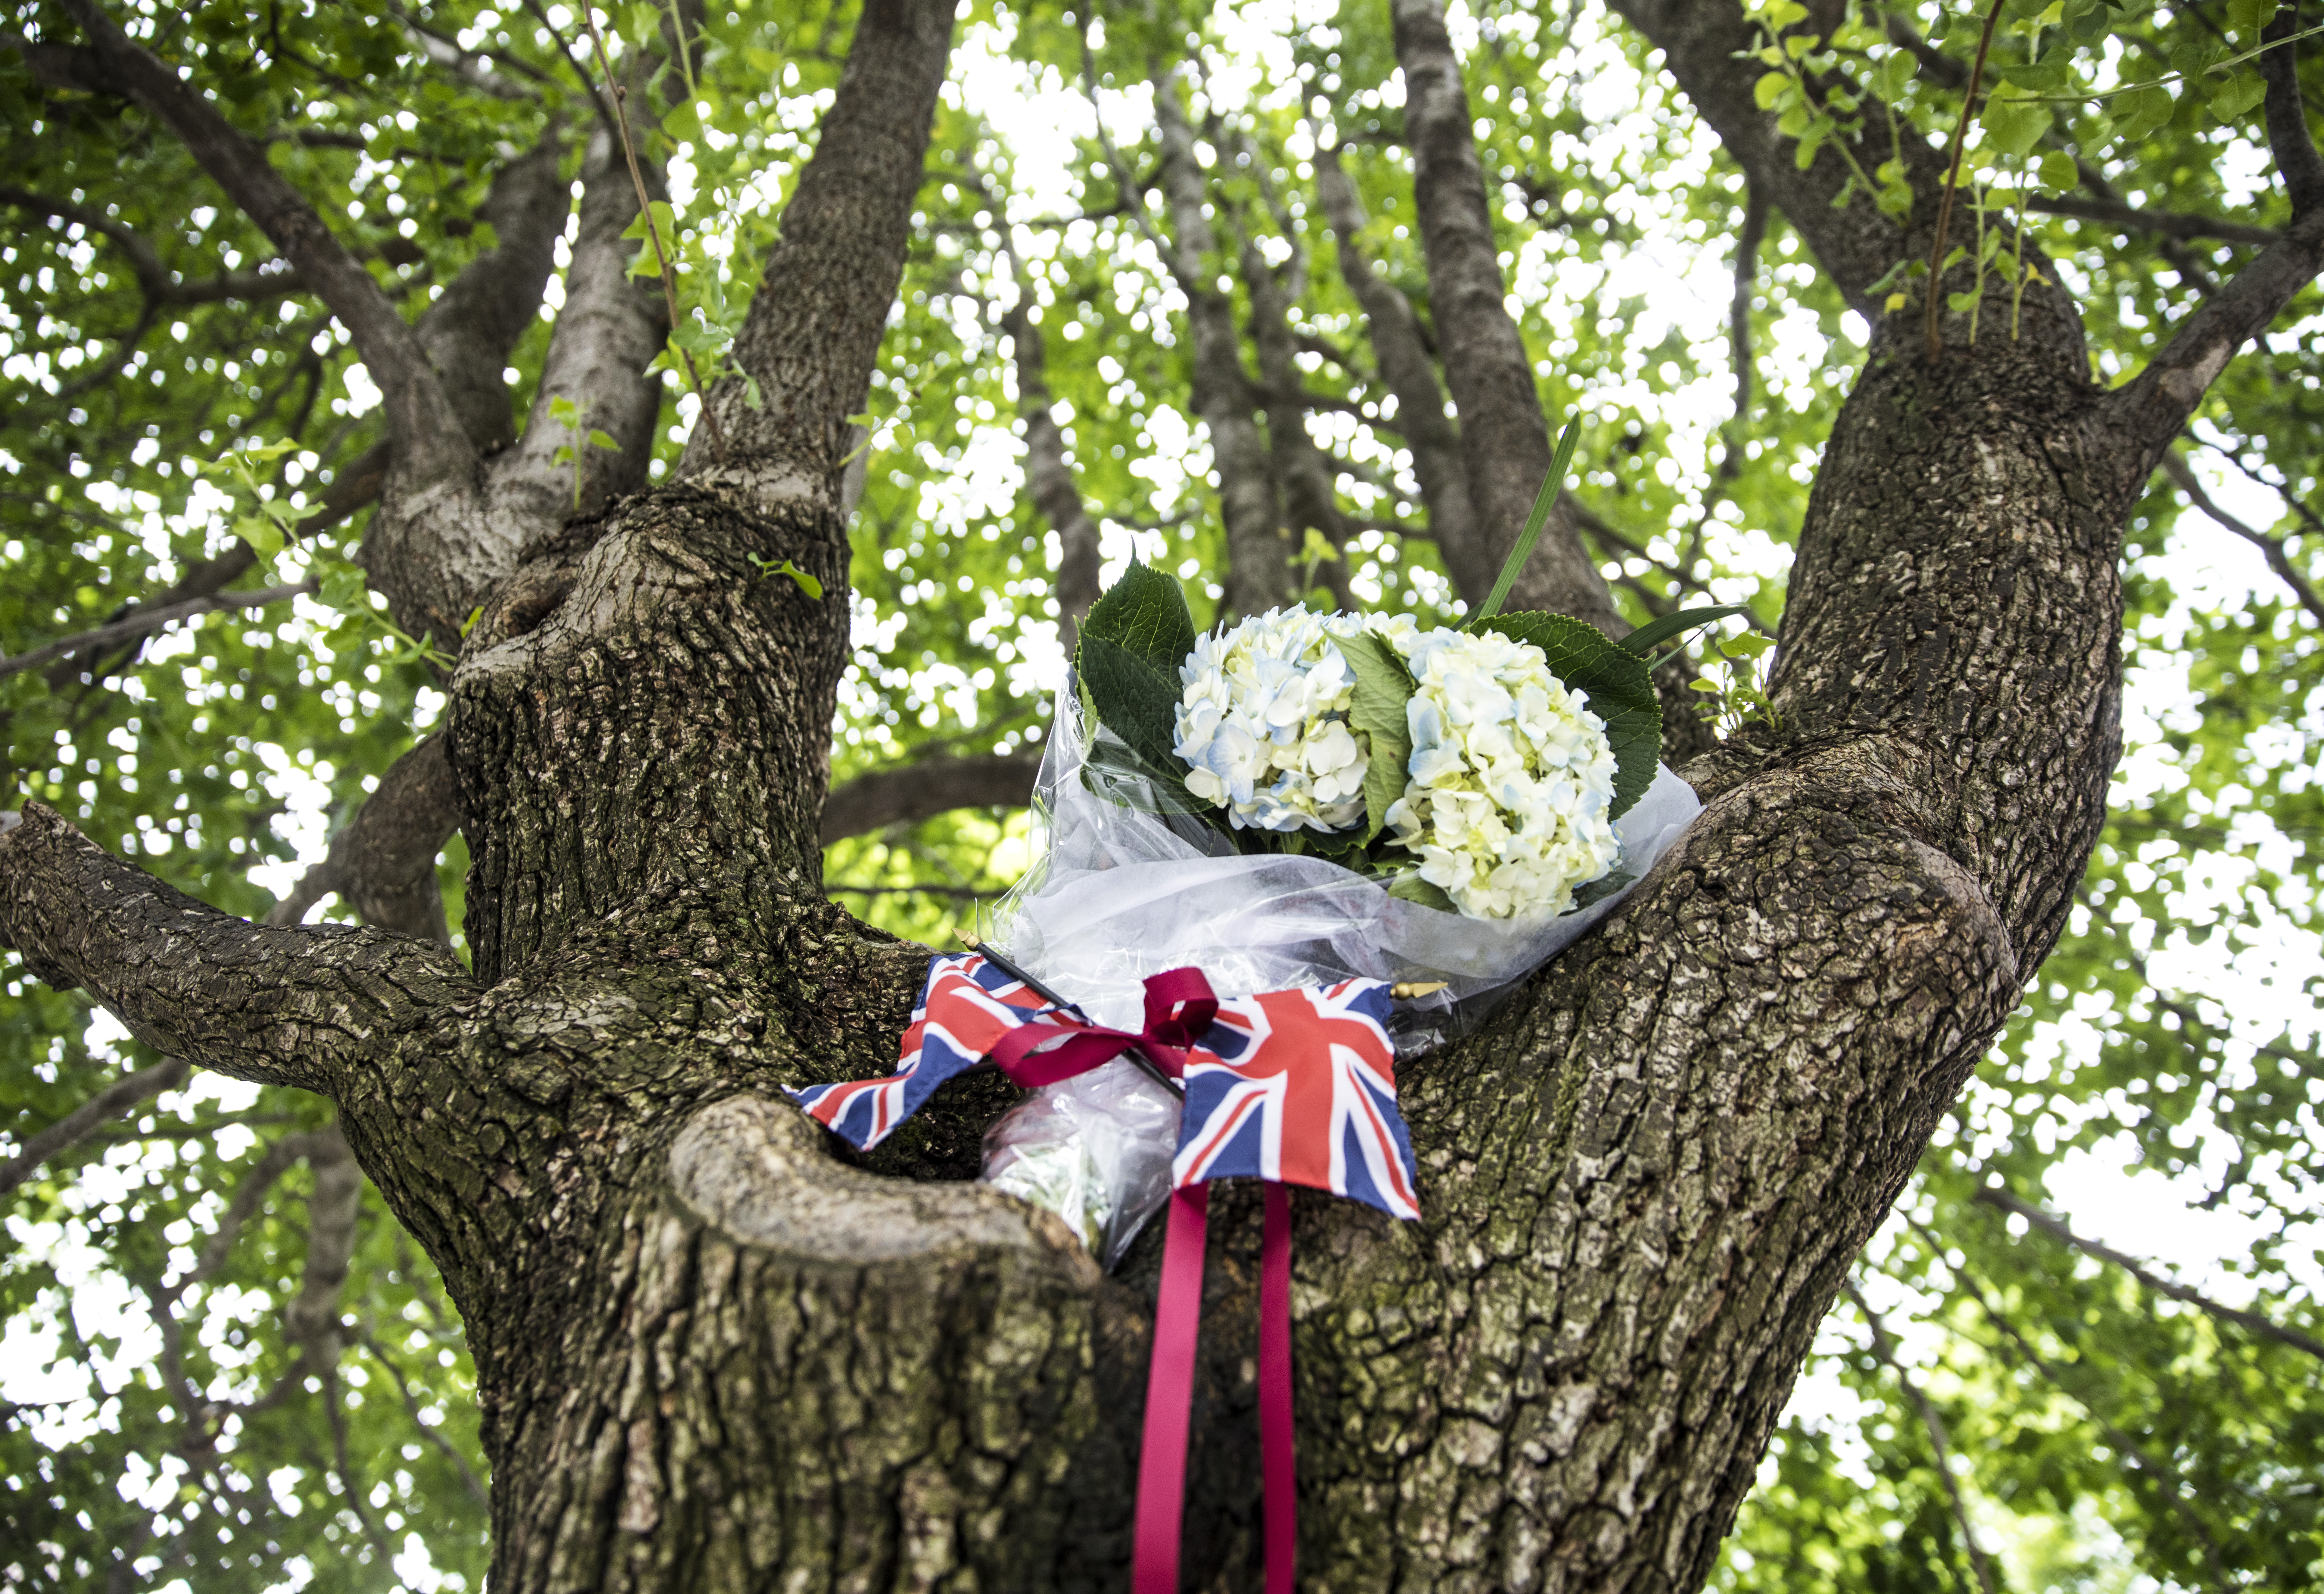 A tribute made up of flowers and British flags have been placed at the Survivor Tree following terrorist attacks in the United Kingdom.